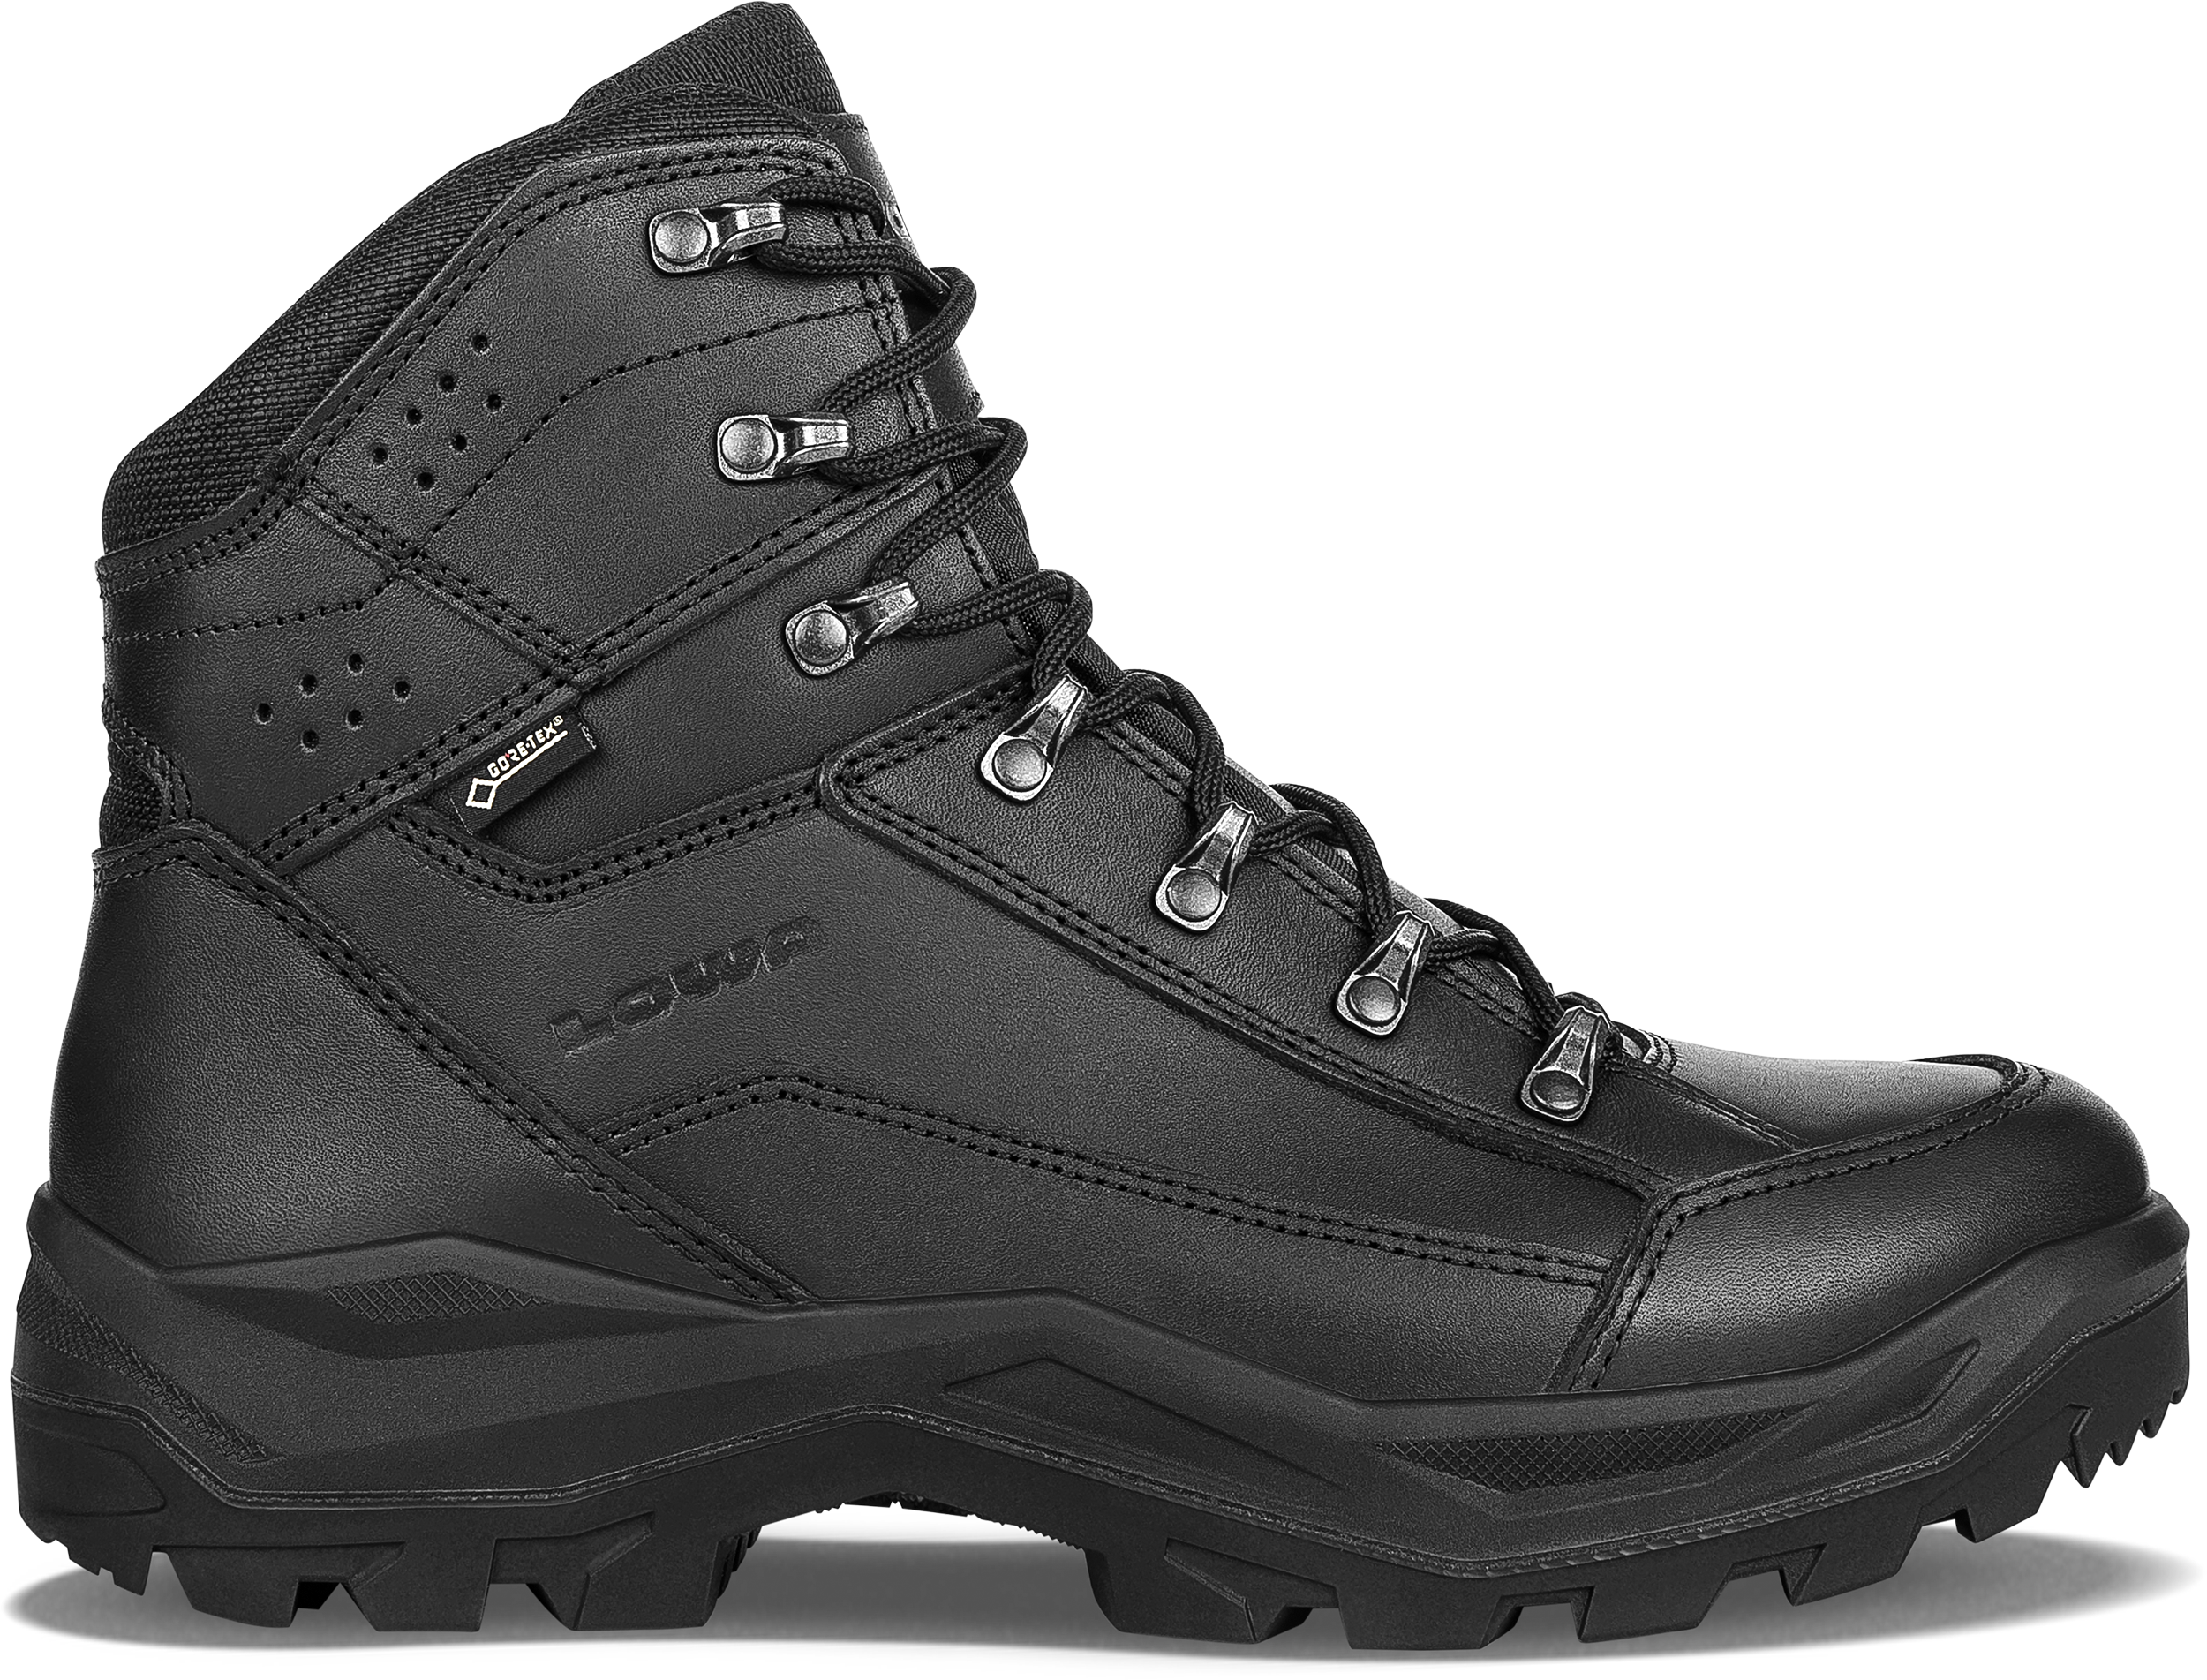 RENEGADE II GTX MID TF: FORCE: Shoes for Men | LOWA DK